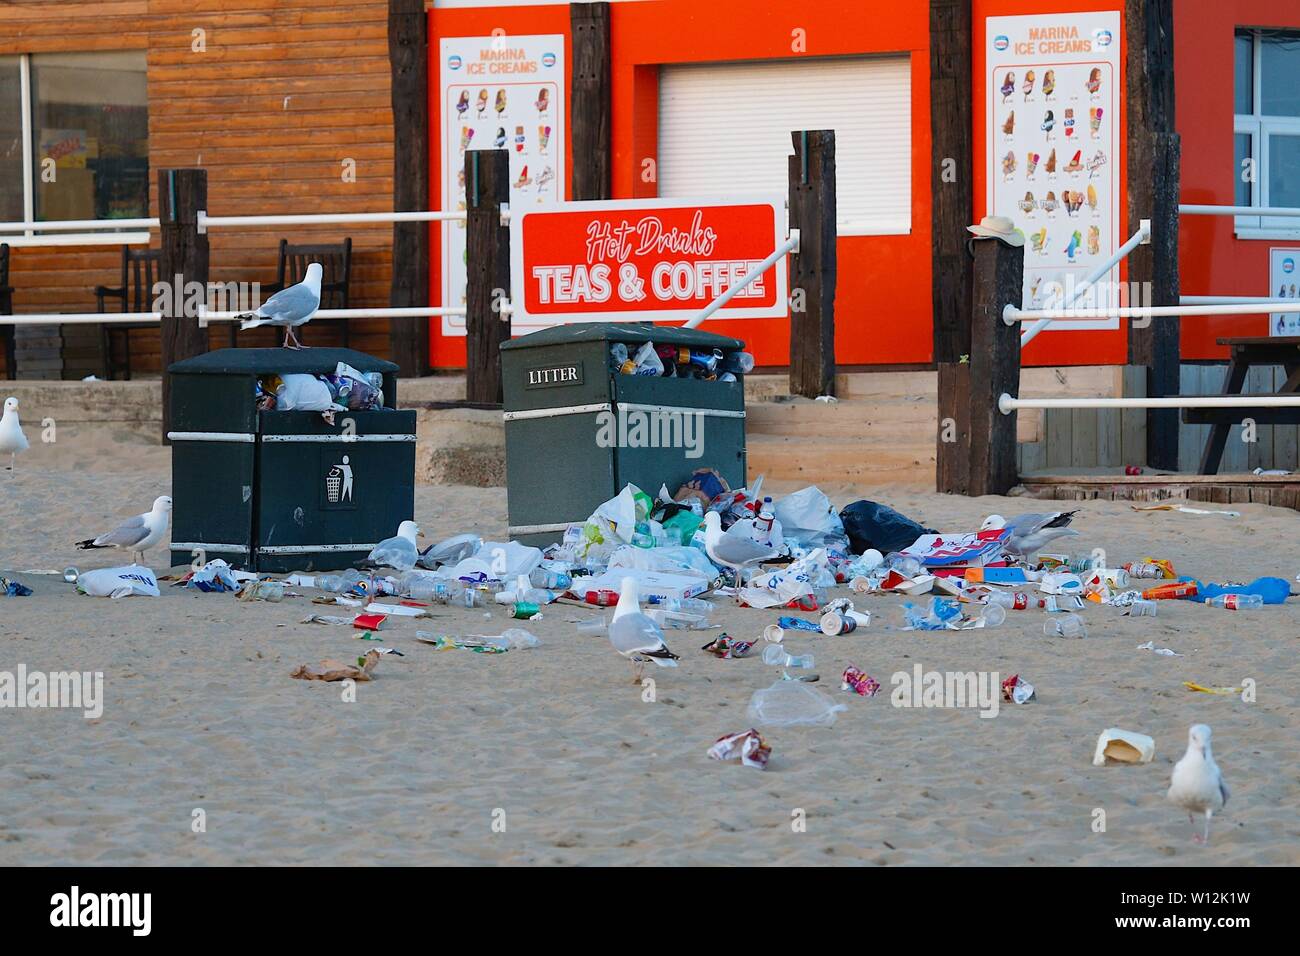 Camber, East Sussex, UK. 29 Jun, 2019. UK Weather: After the record breaking heatwave the seagulls scavenge through the heaps of litter left behind on the Camber Sands beach in East Sussex. ©Paul Lawrenson 2019, Photo Credit: Paul Lawrenson/Alamy Live News Stock Photo